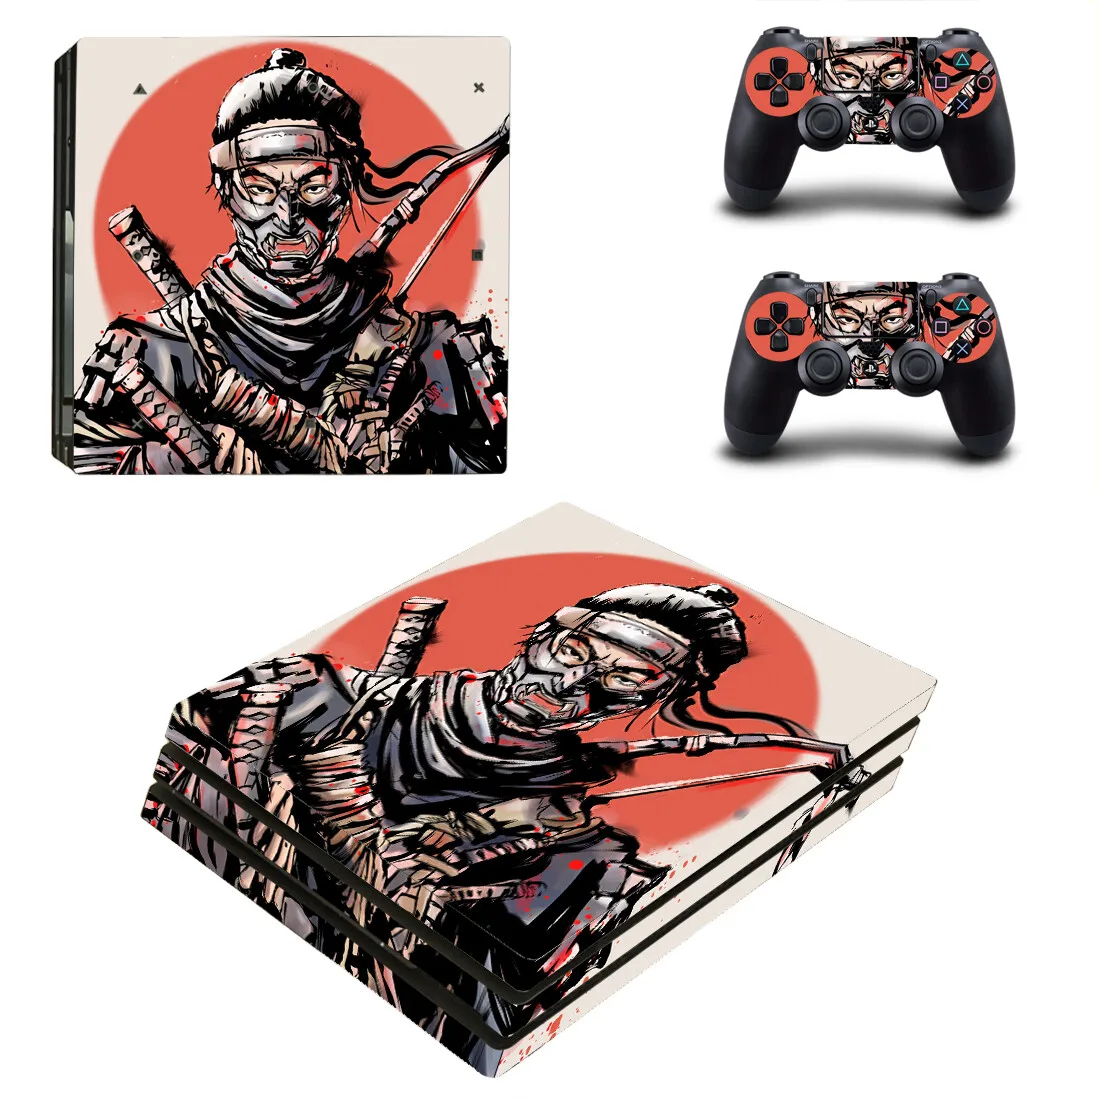 Ghost of Tsushima PS4 Pro Skin Sticker Decals Cover For PlayStation 4 PS4 Pro Console & Controller Skins Vinyl images - 6